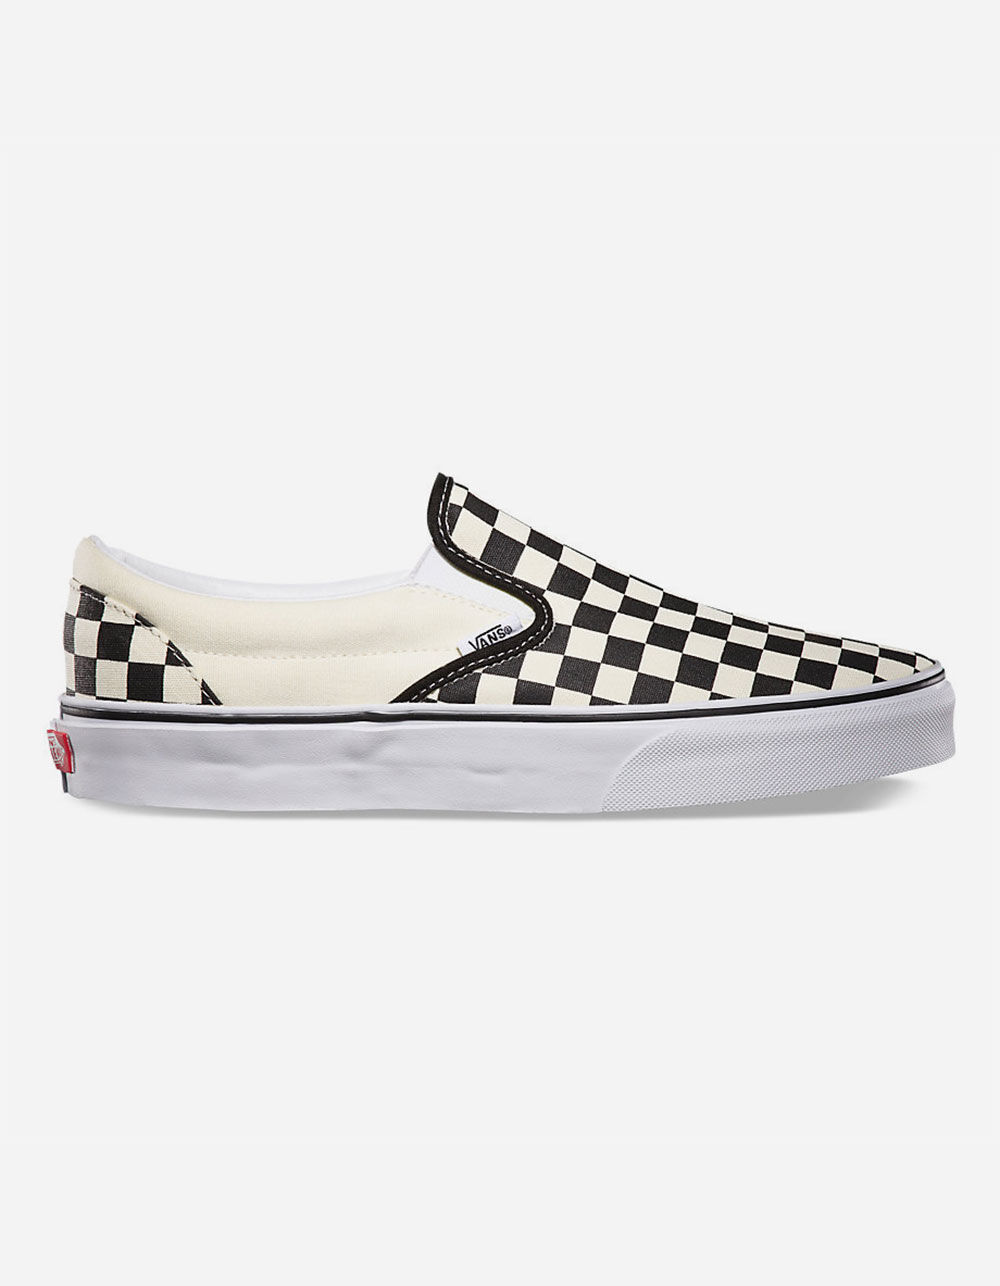 VANS Checkerboard Slip-On Black & Off White Shoes - CHECKERBOARD | Tillys